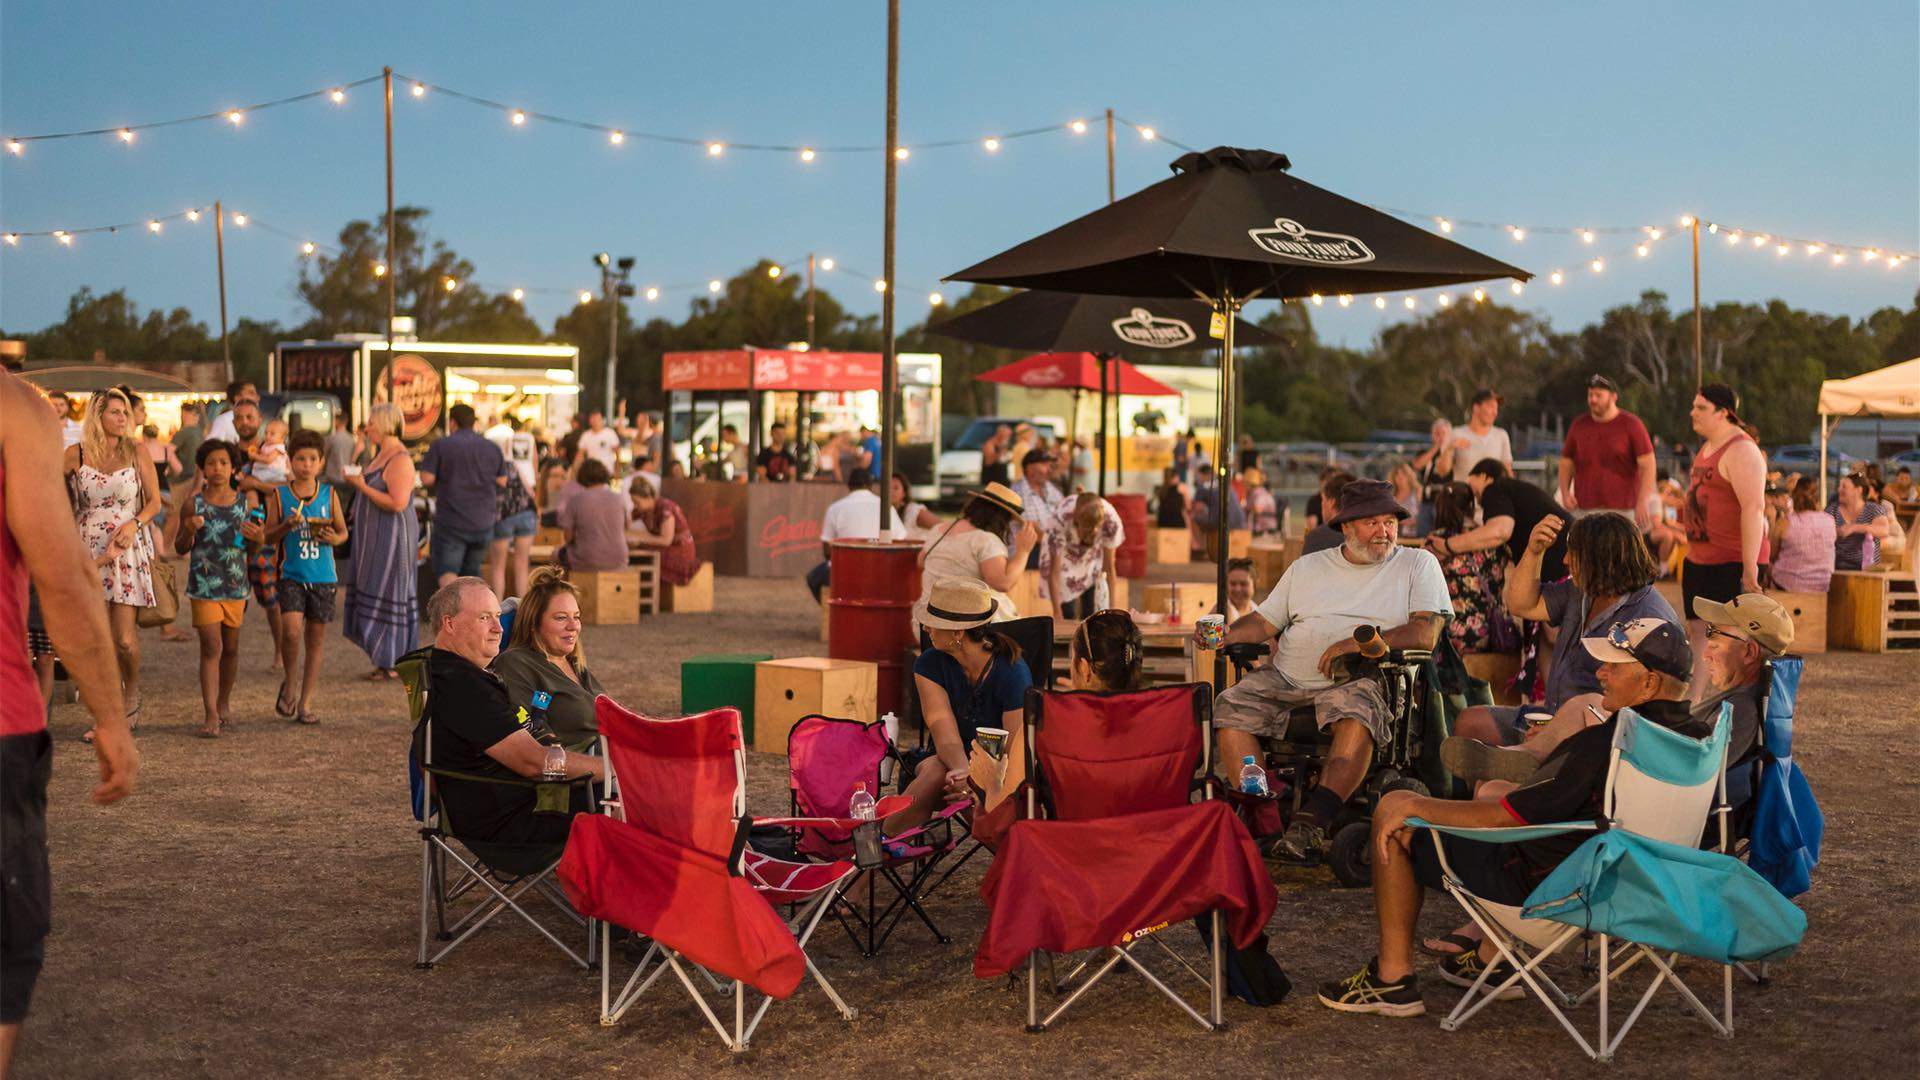 The Food Truck Festival 2019